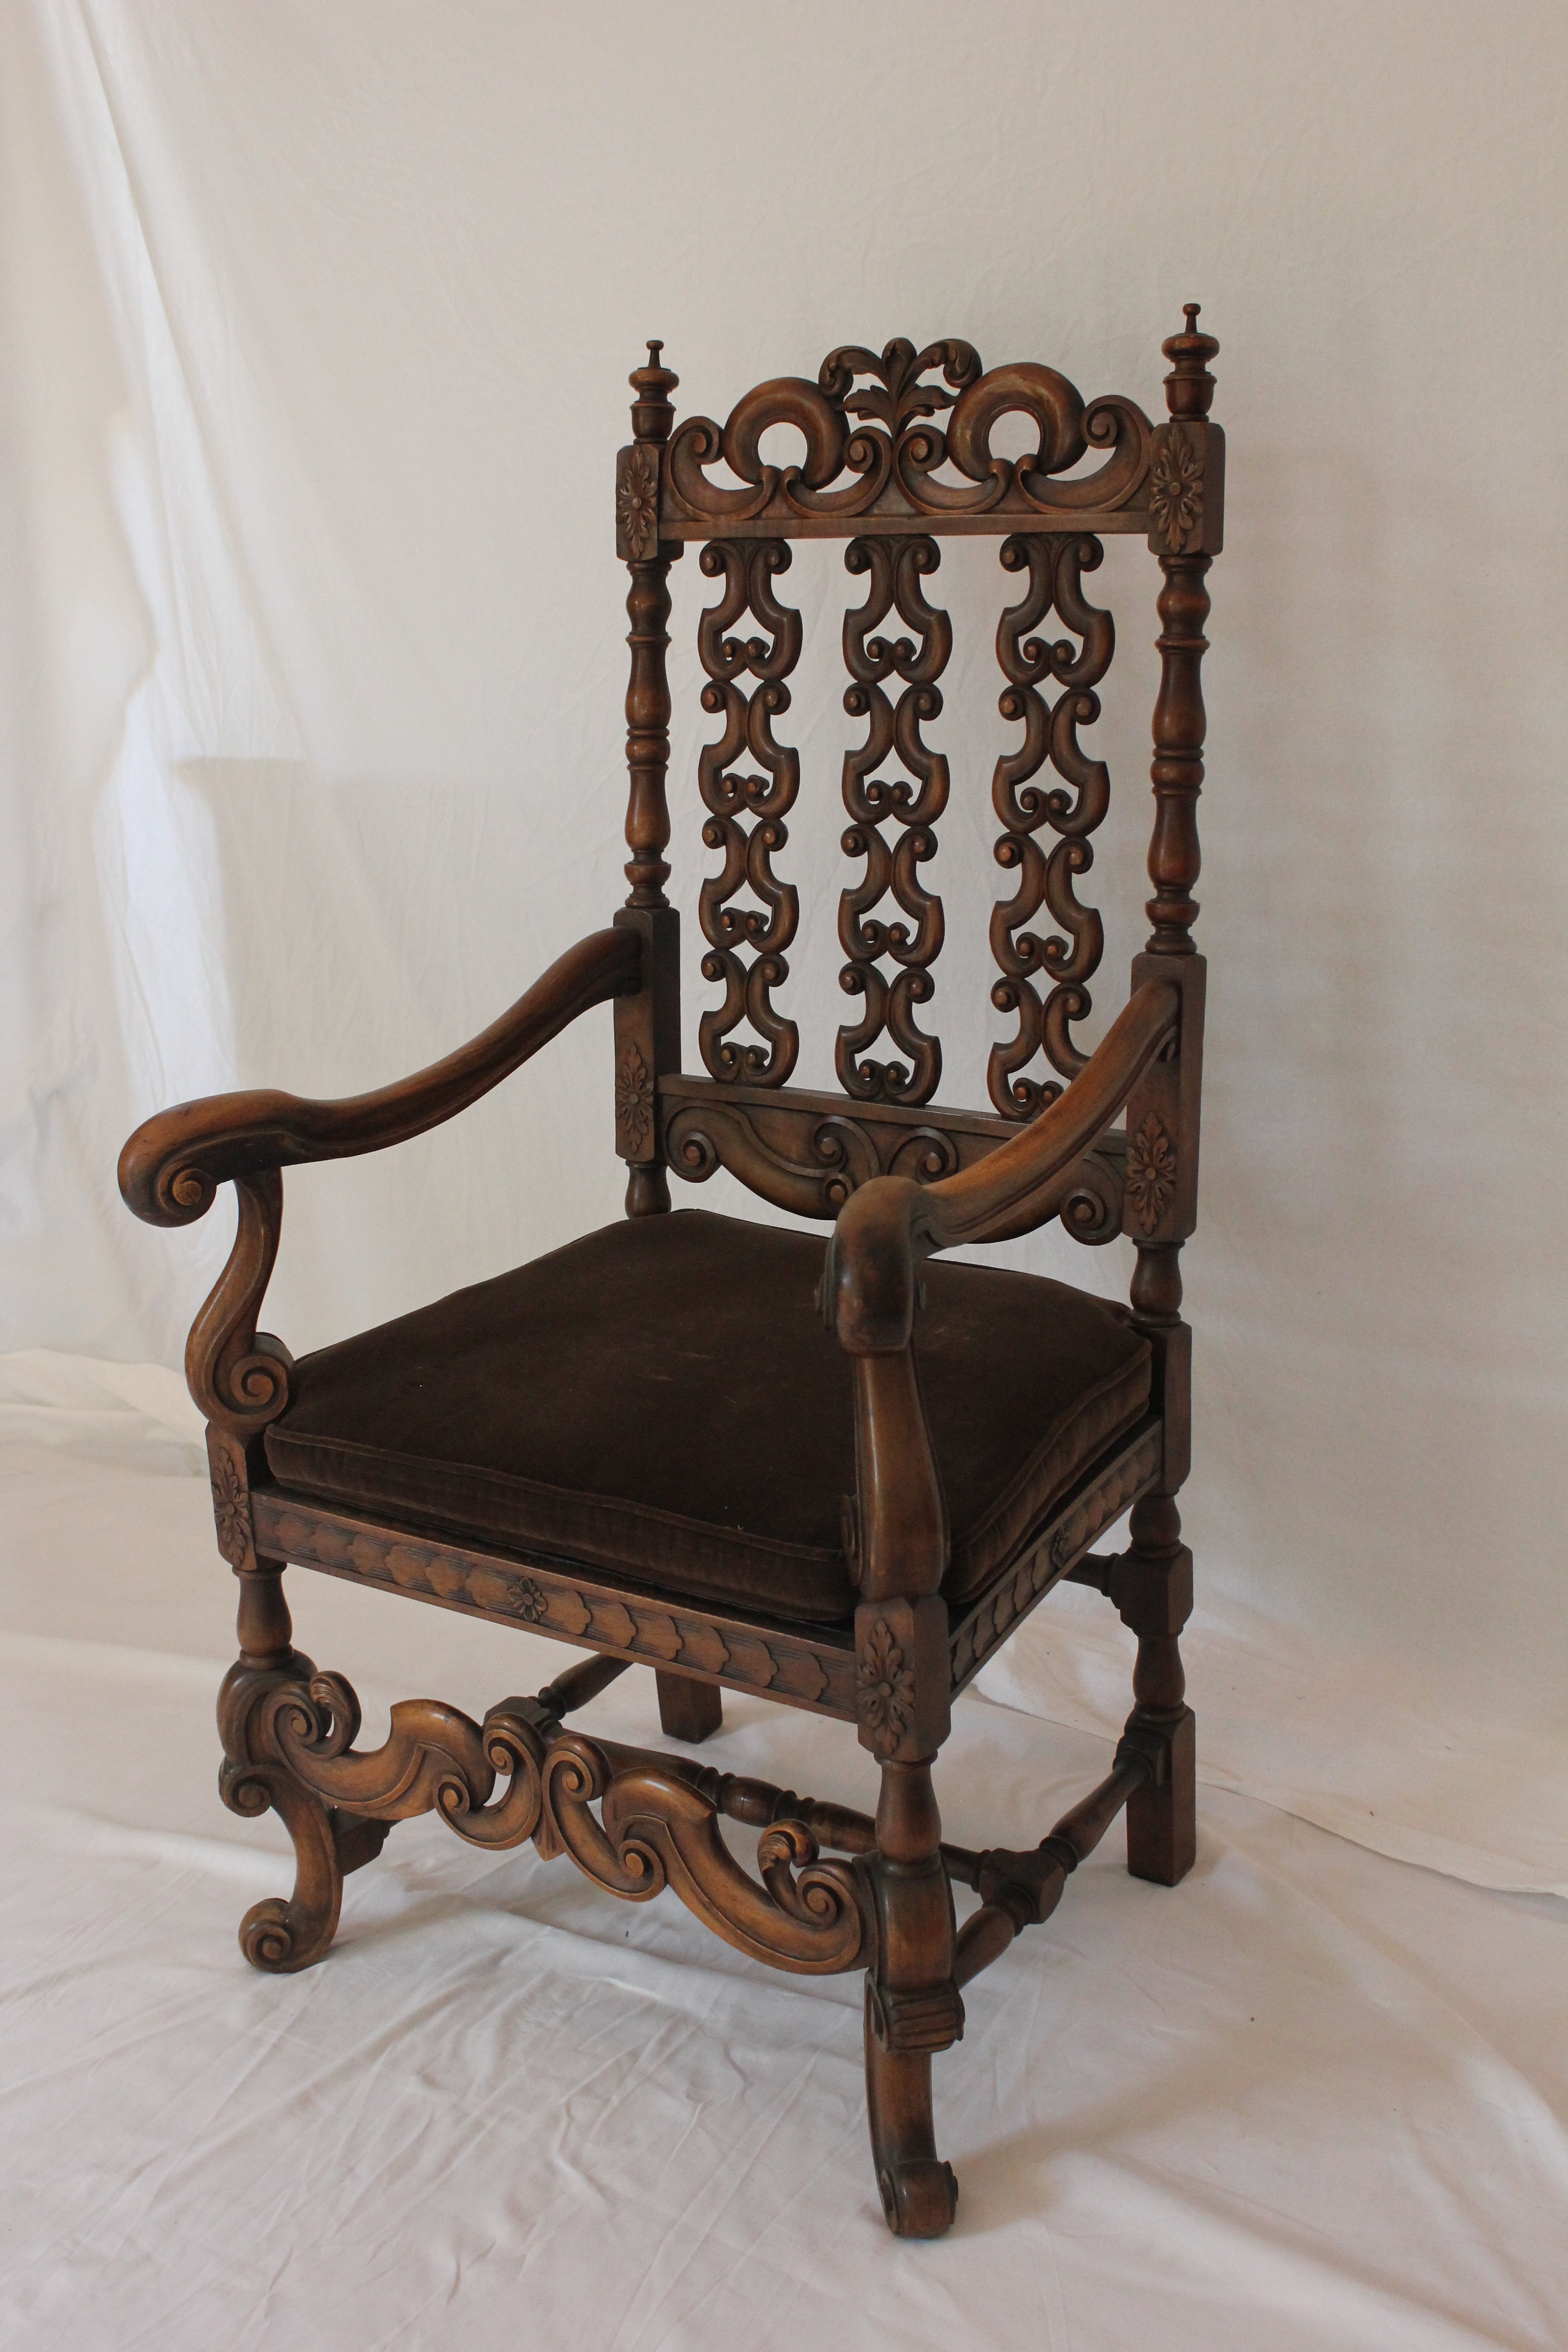 AF2-223: Antique Early 20th Century Heavily Carved Walnut Charles II Style Open Arm Chair